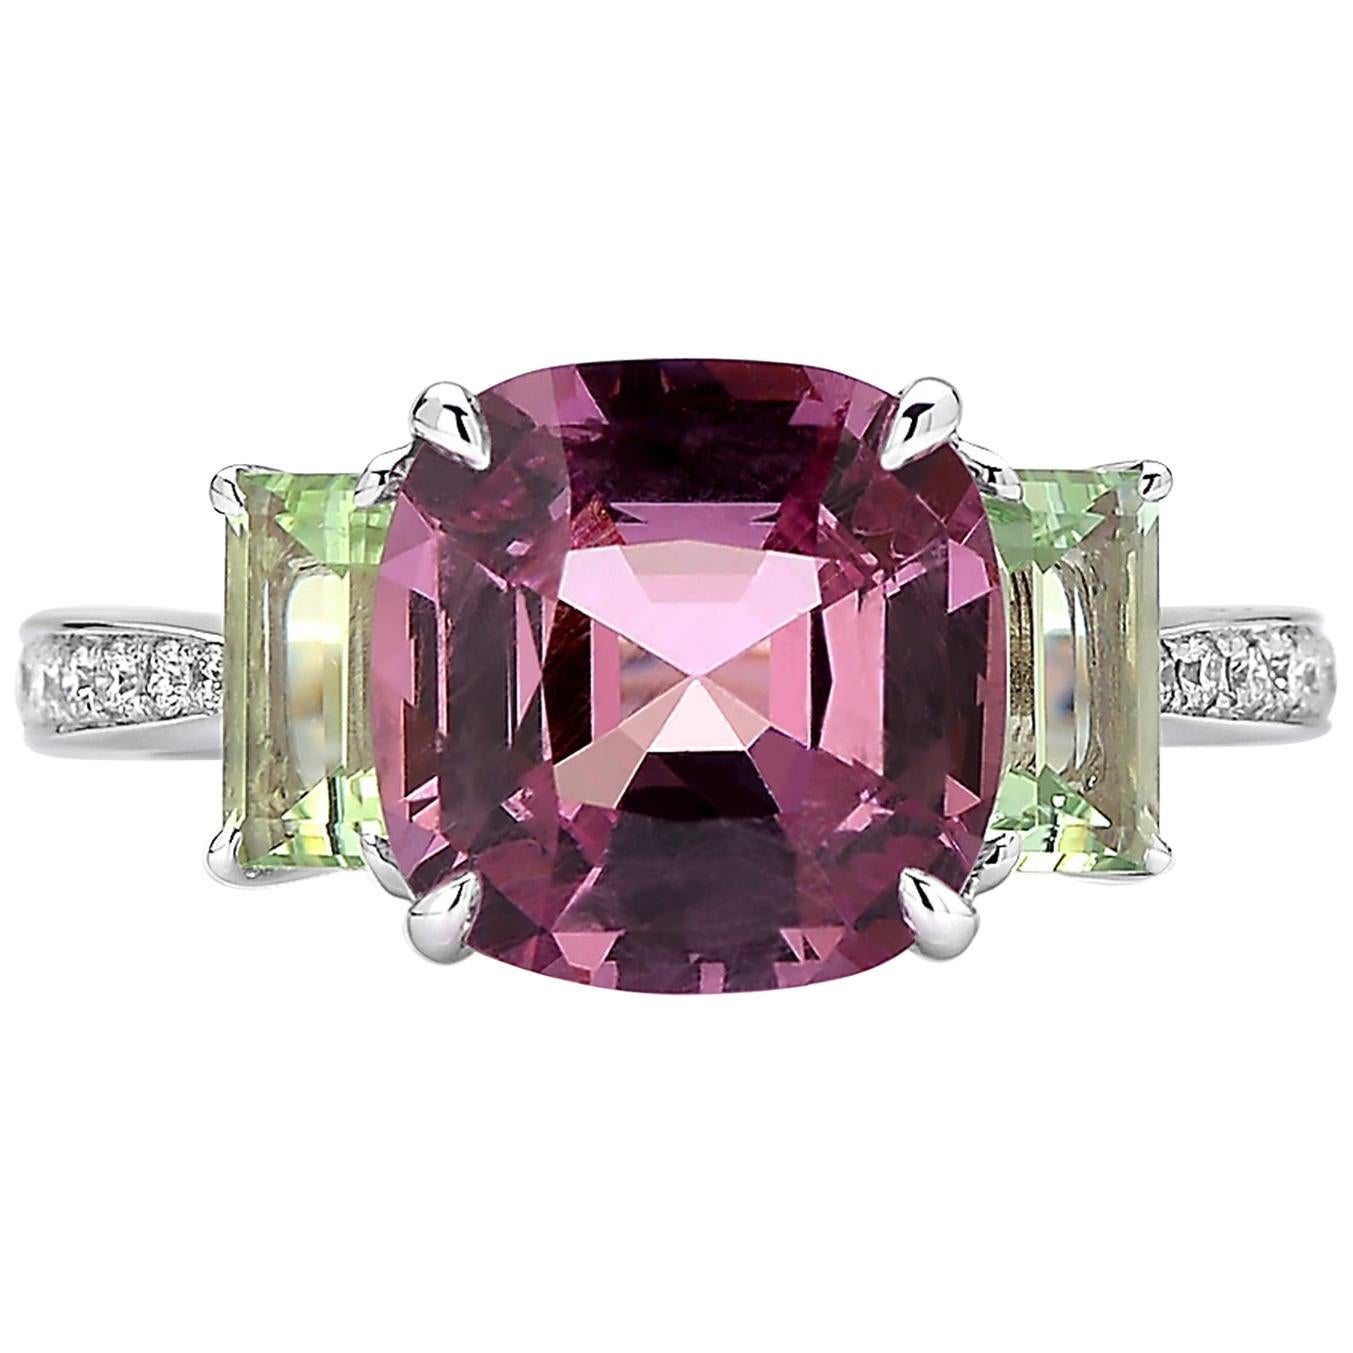 Paolo Costagli 18 Karat White Gold Spinel, Canary Tourmaline and Diamond Ring For Sale